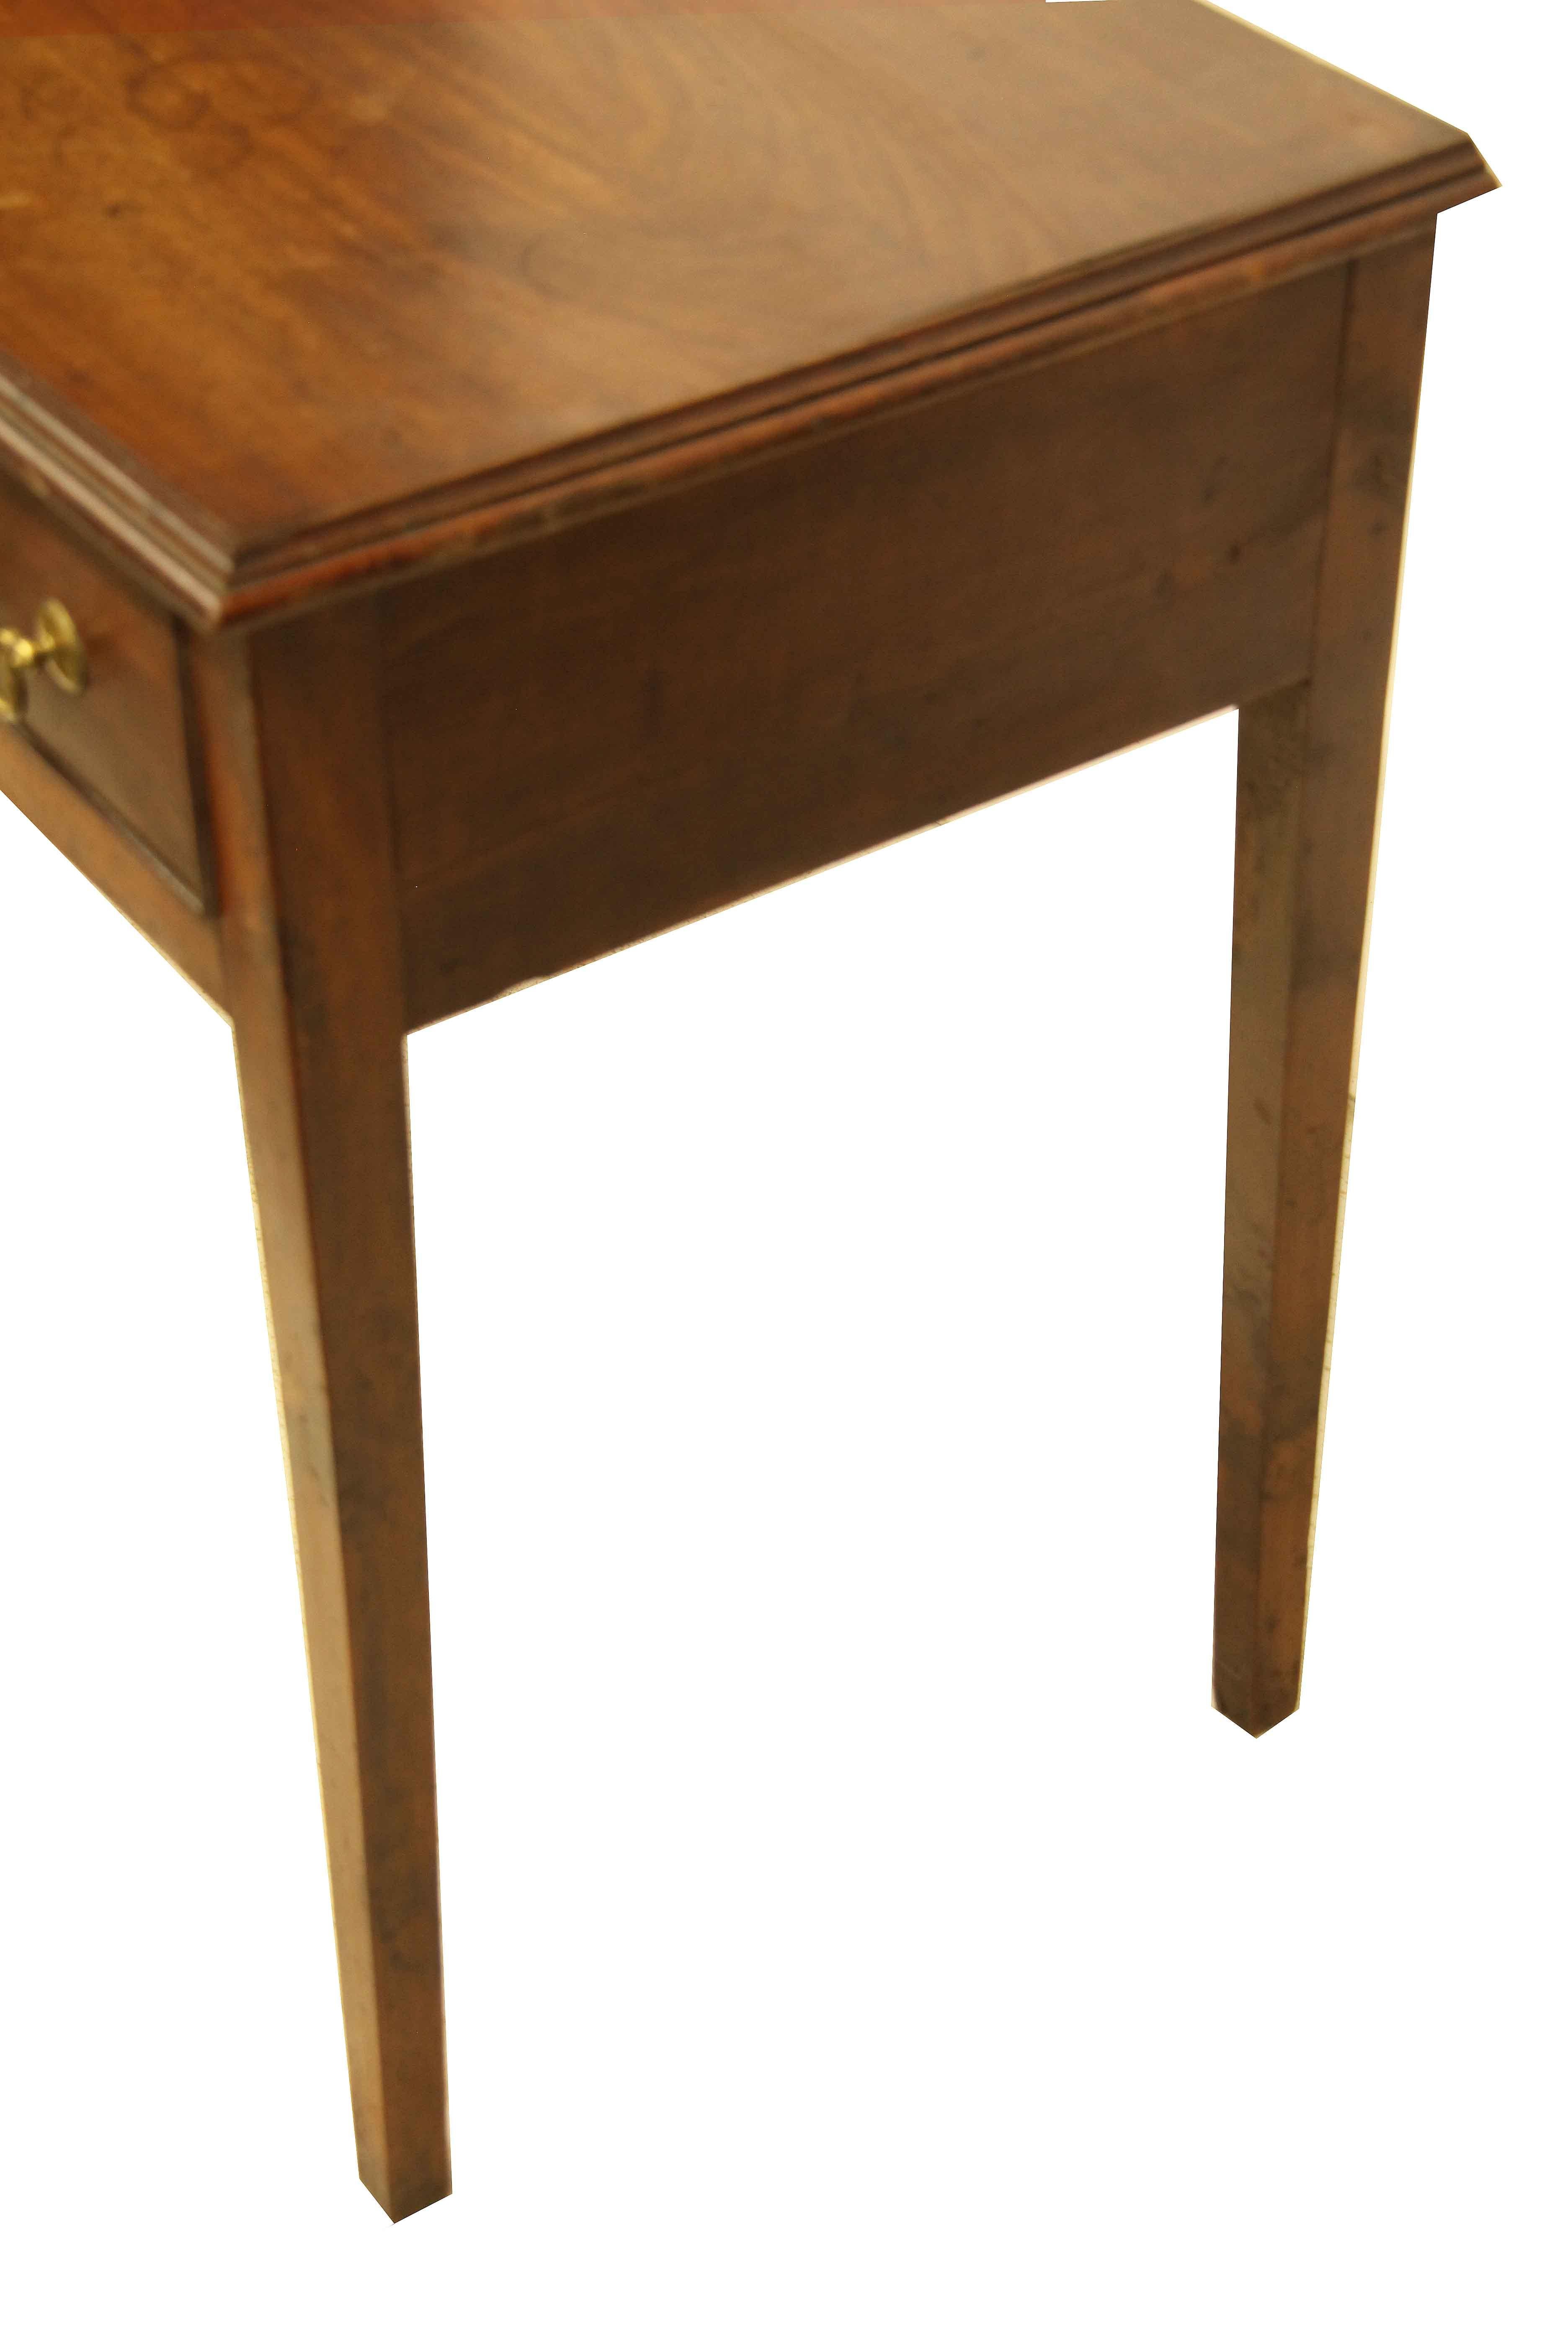 Anglais Table d'appoint George III en vente